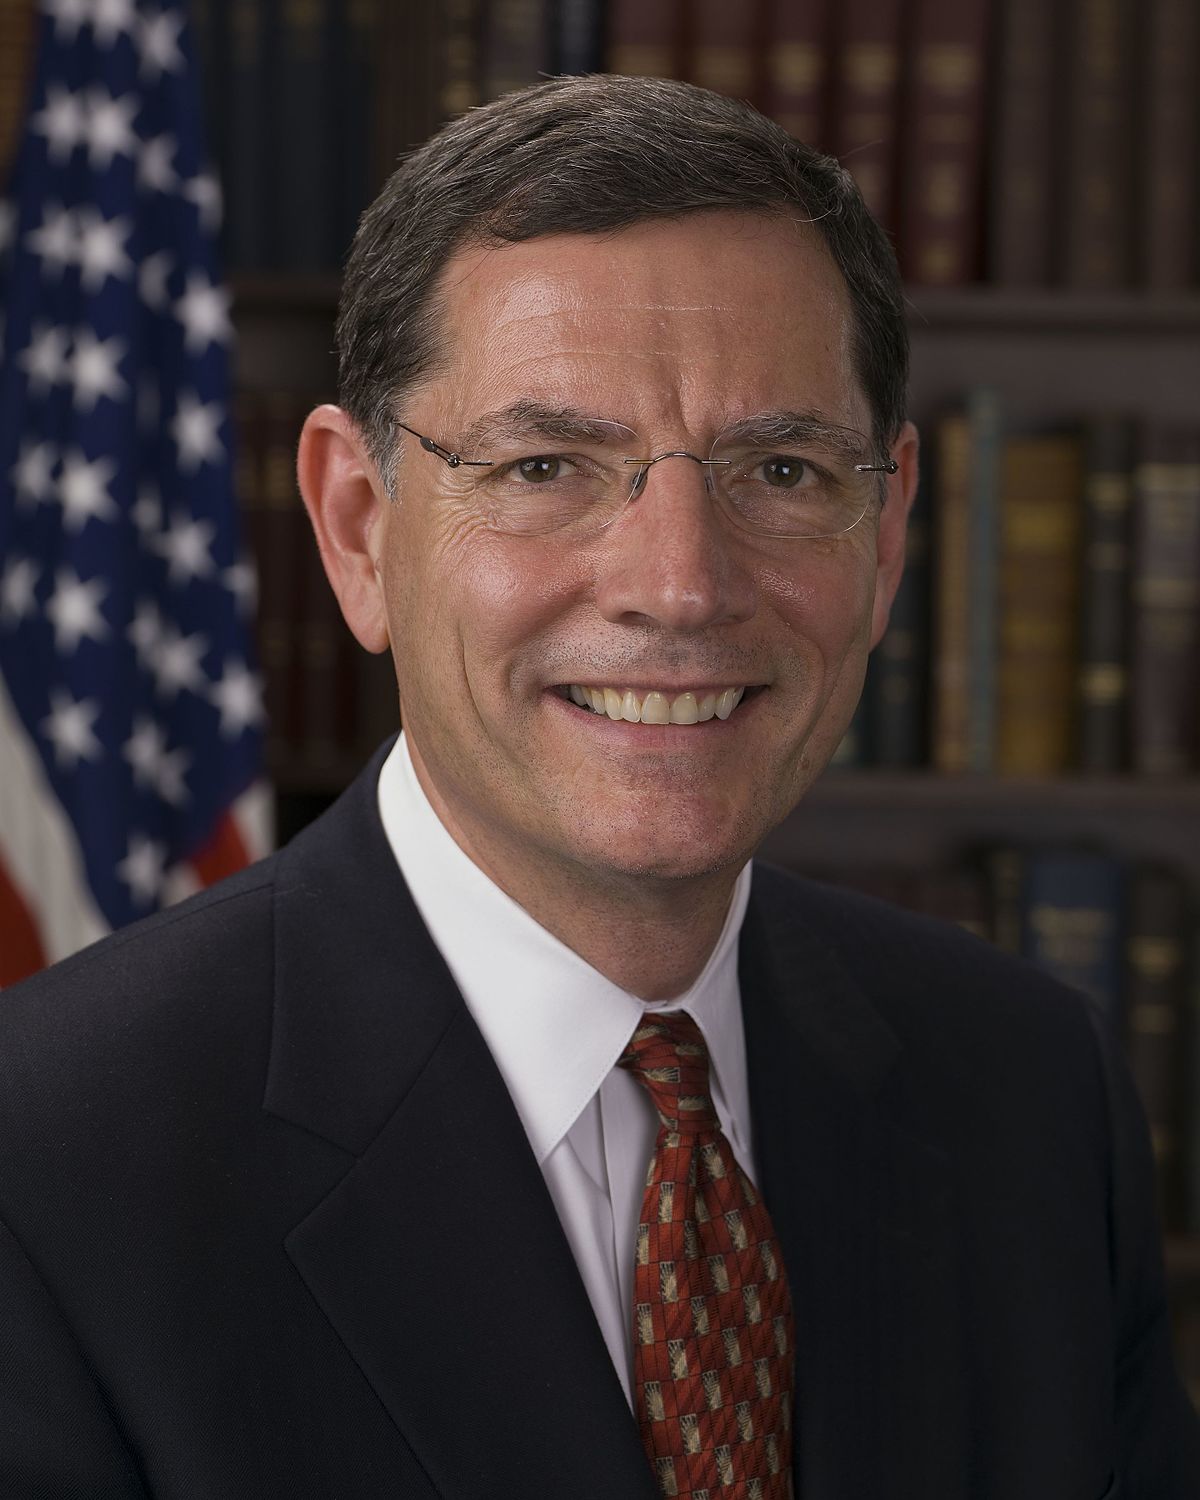 Senator John Barrasso, a Wyoming Republican and chair of the Environment and Public Works Committee